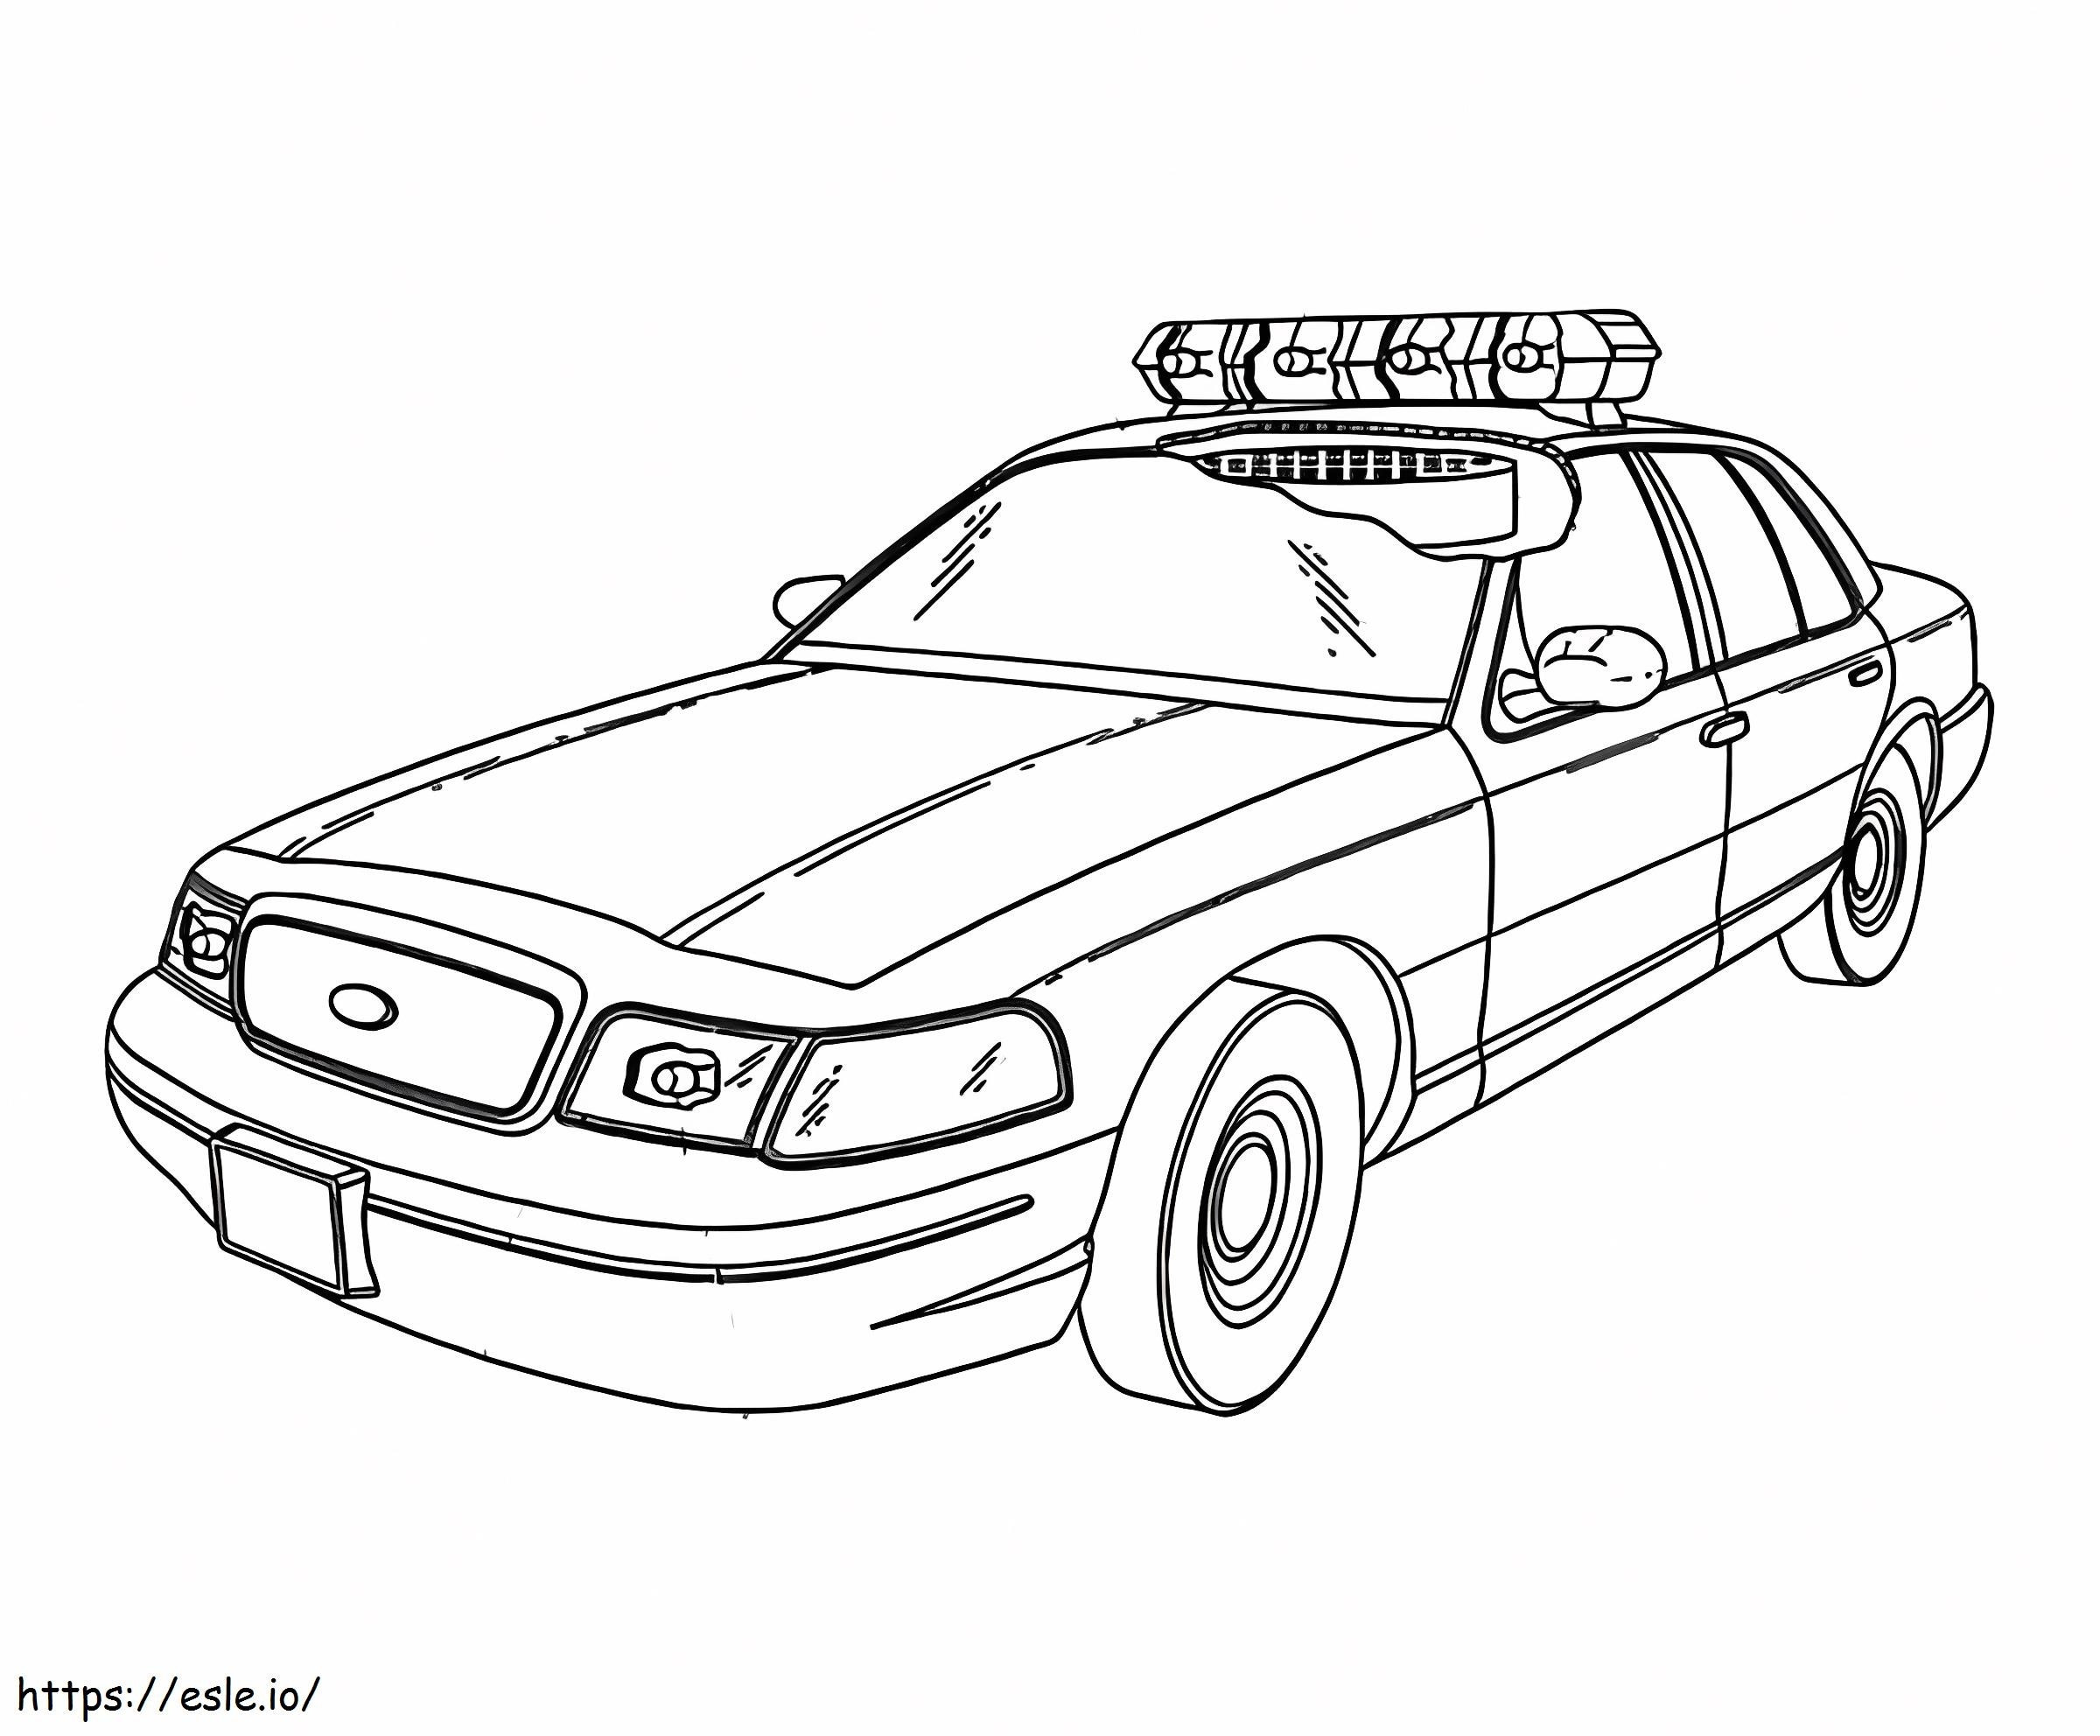 Police Car To Color coloring page